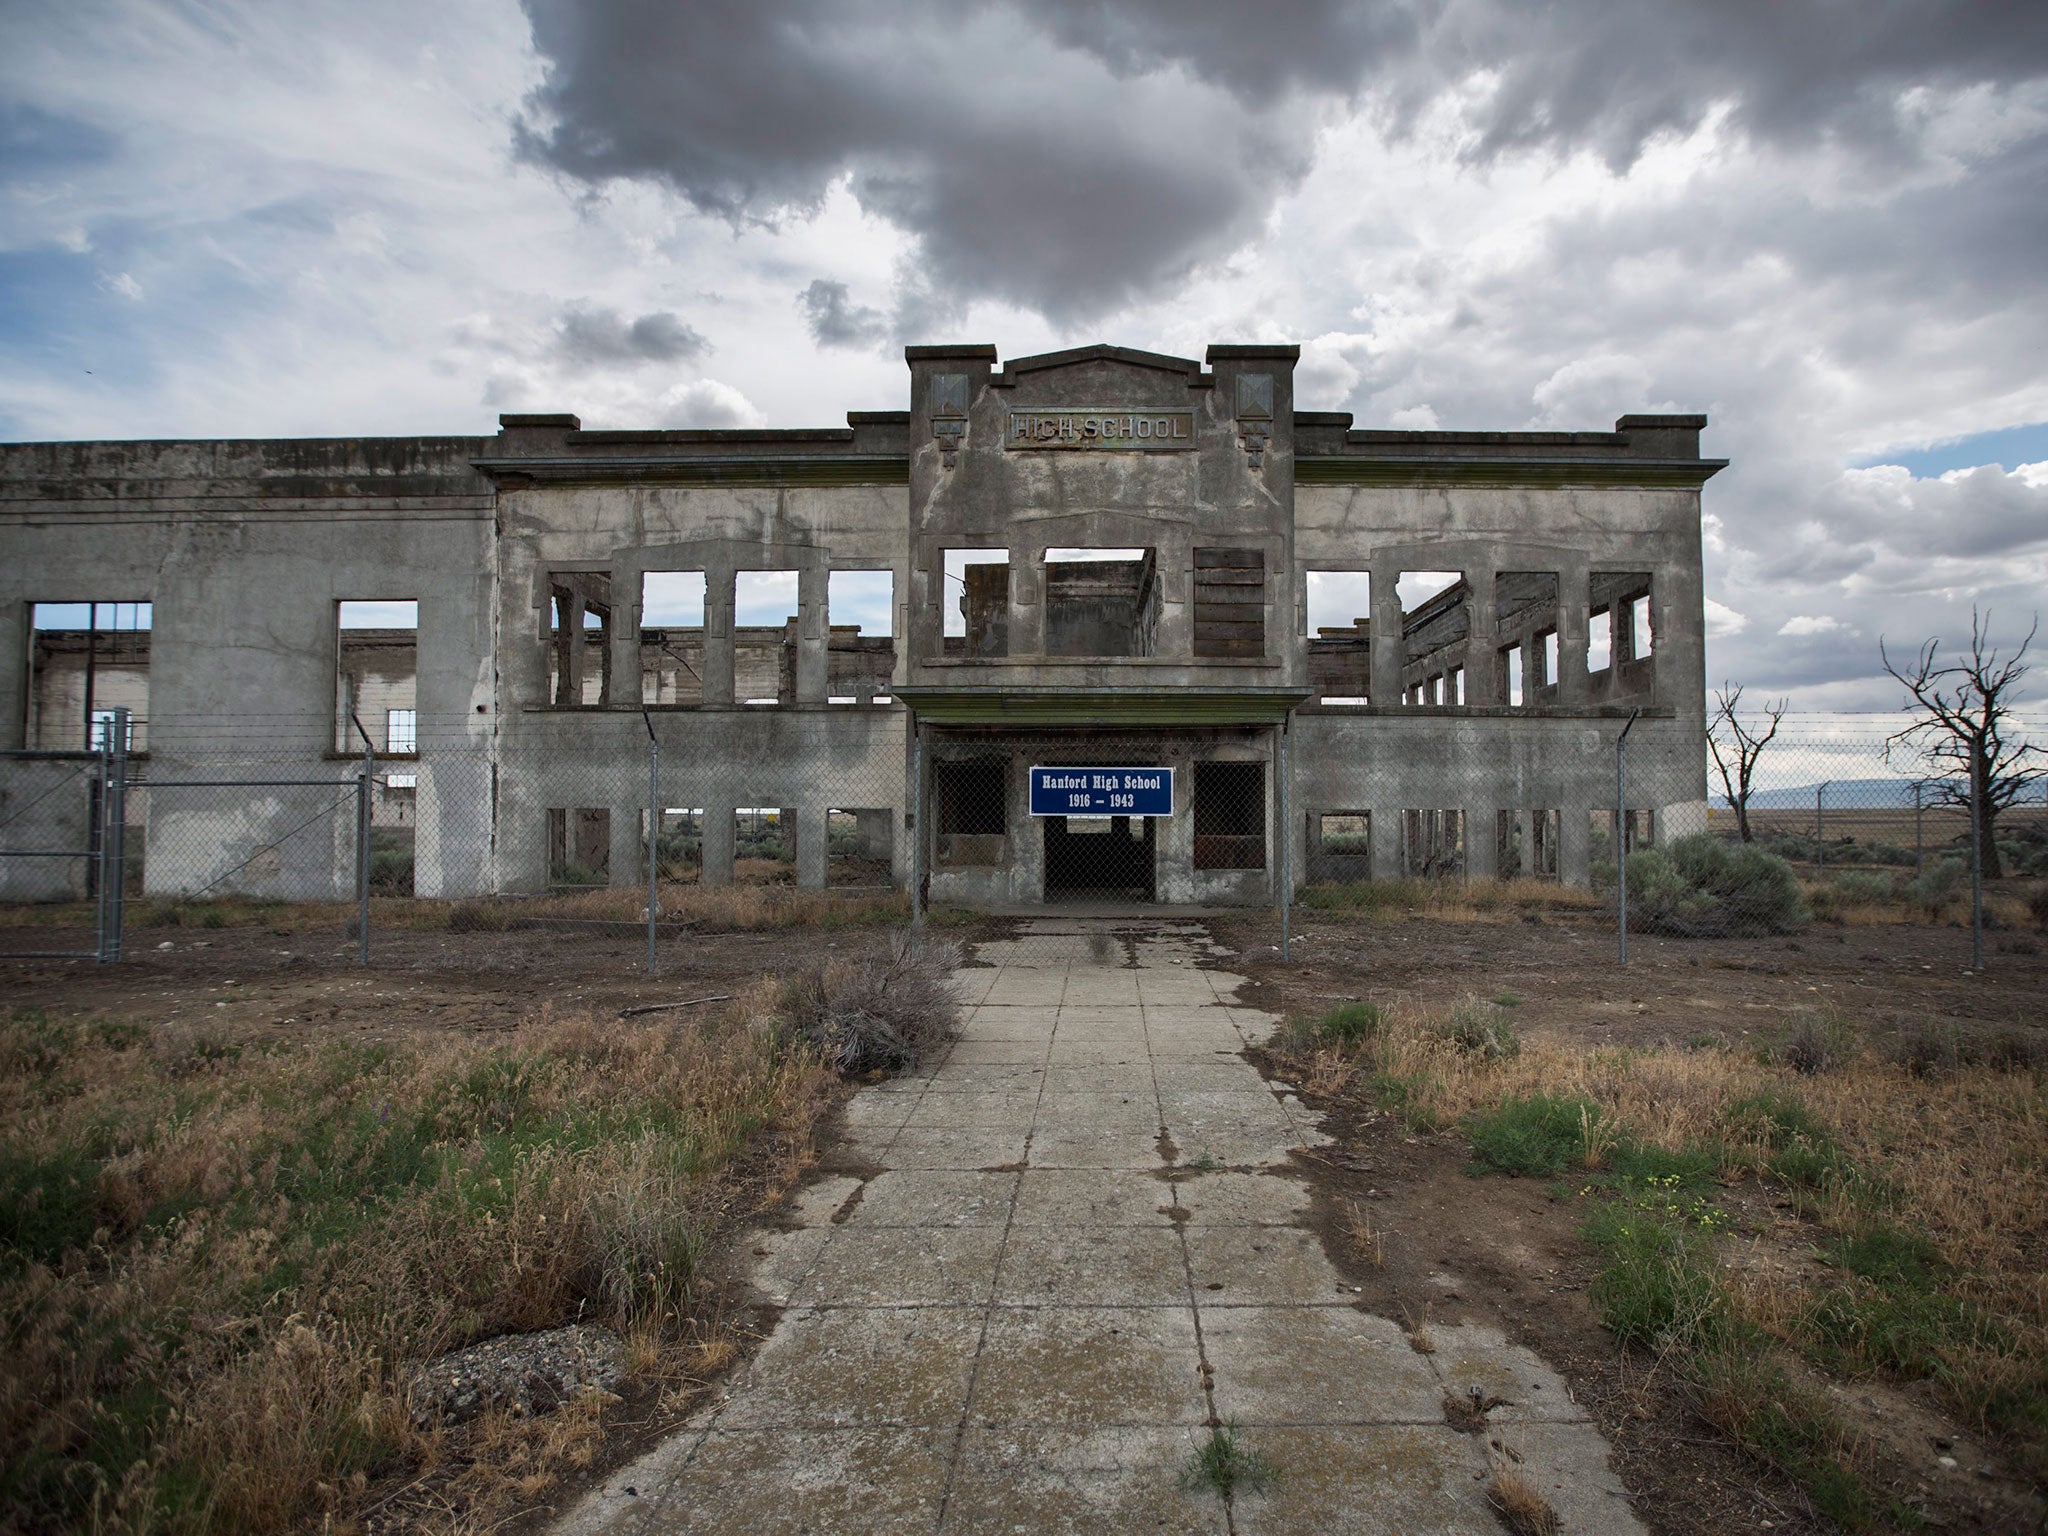 The remains of Hanford High School, which will become part of the soon-to-be-established Manhattan Project National Historical Park, are seen on the Hanford Site in Hanford, Washington